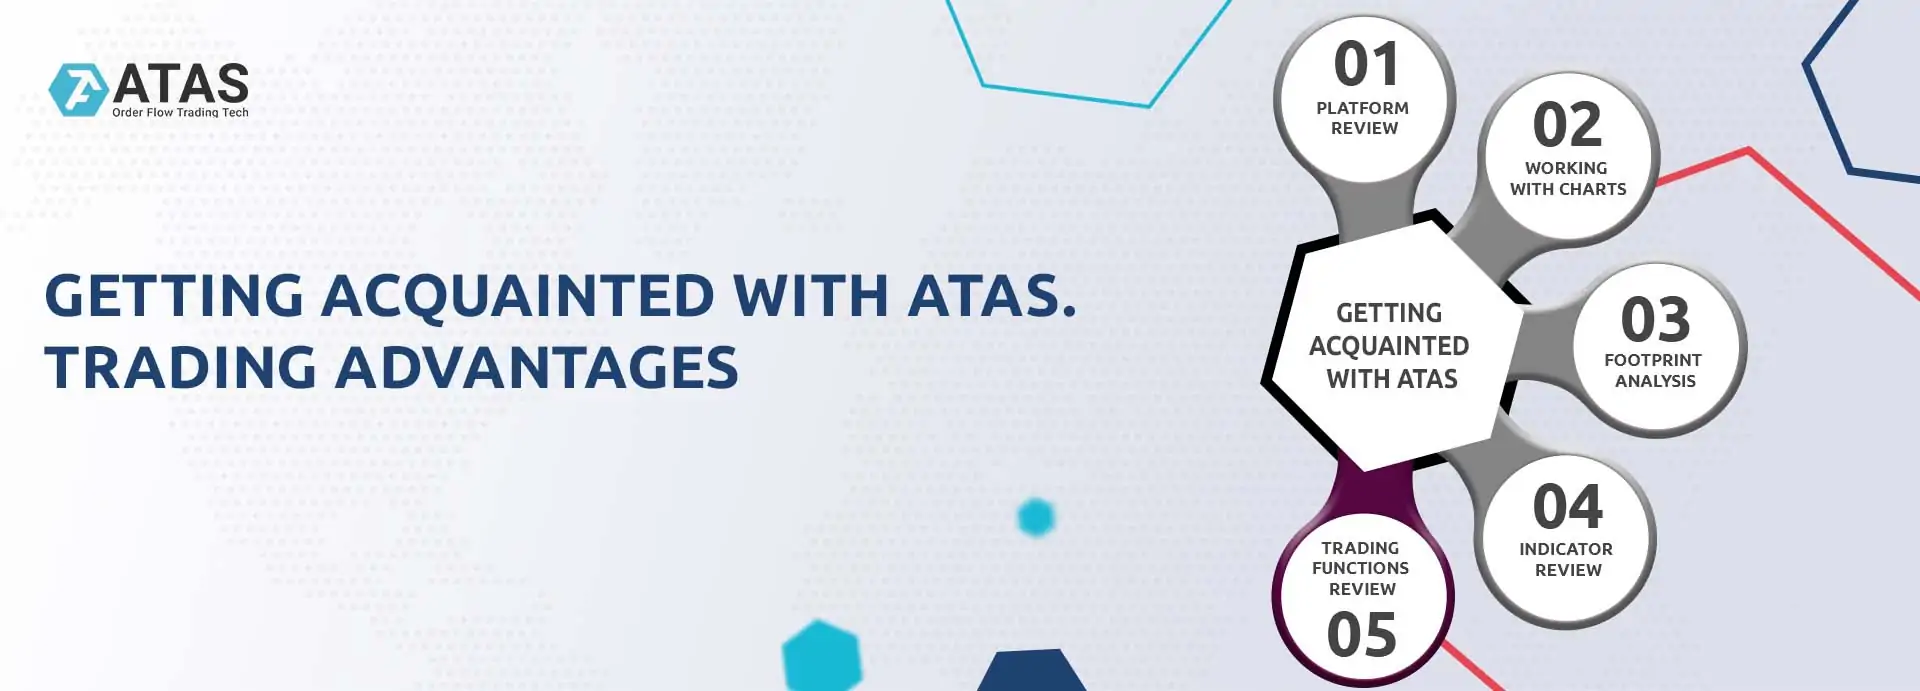 Getting acquainted with ATAS. Trading advantages